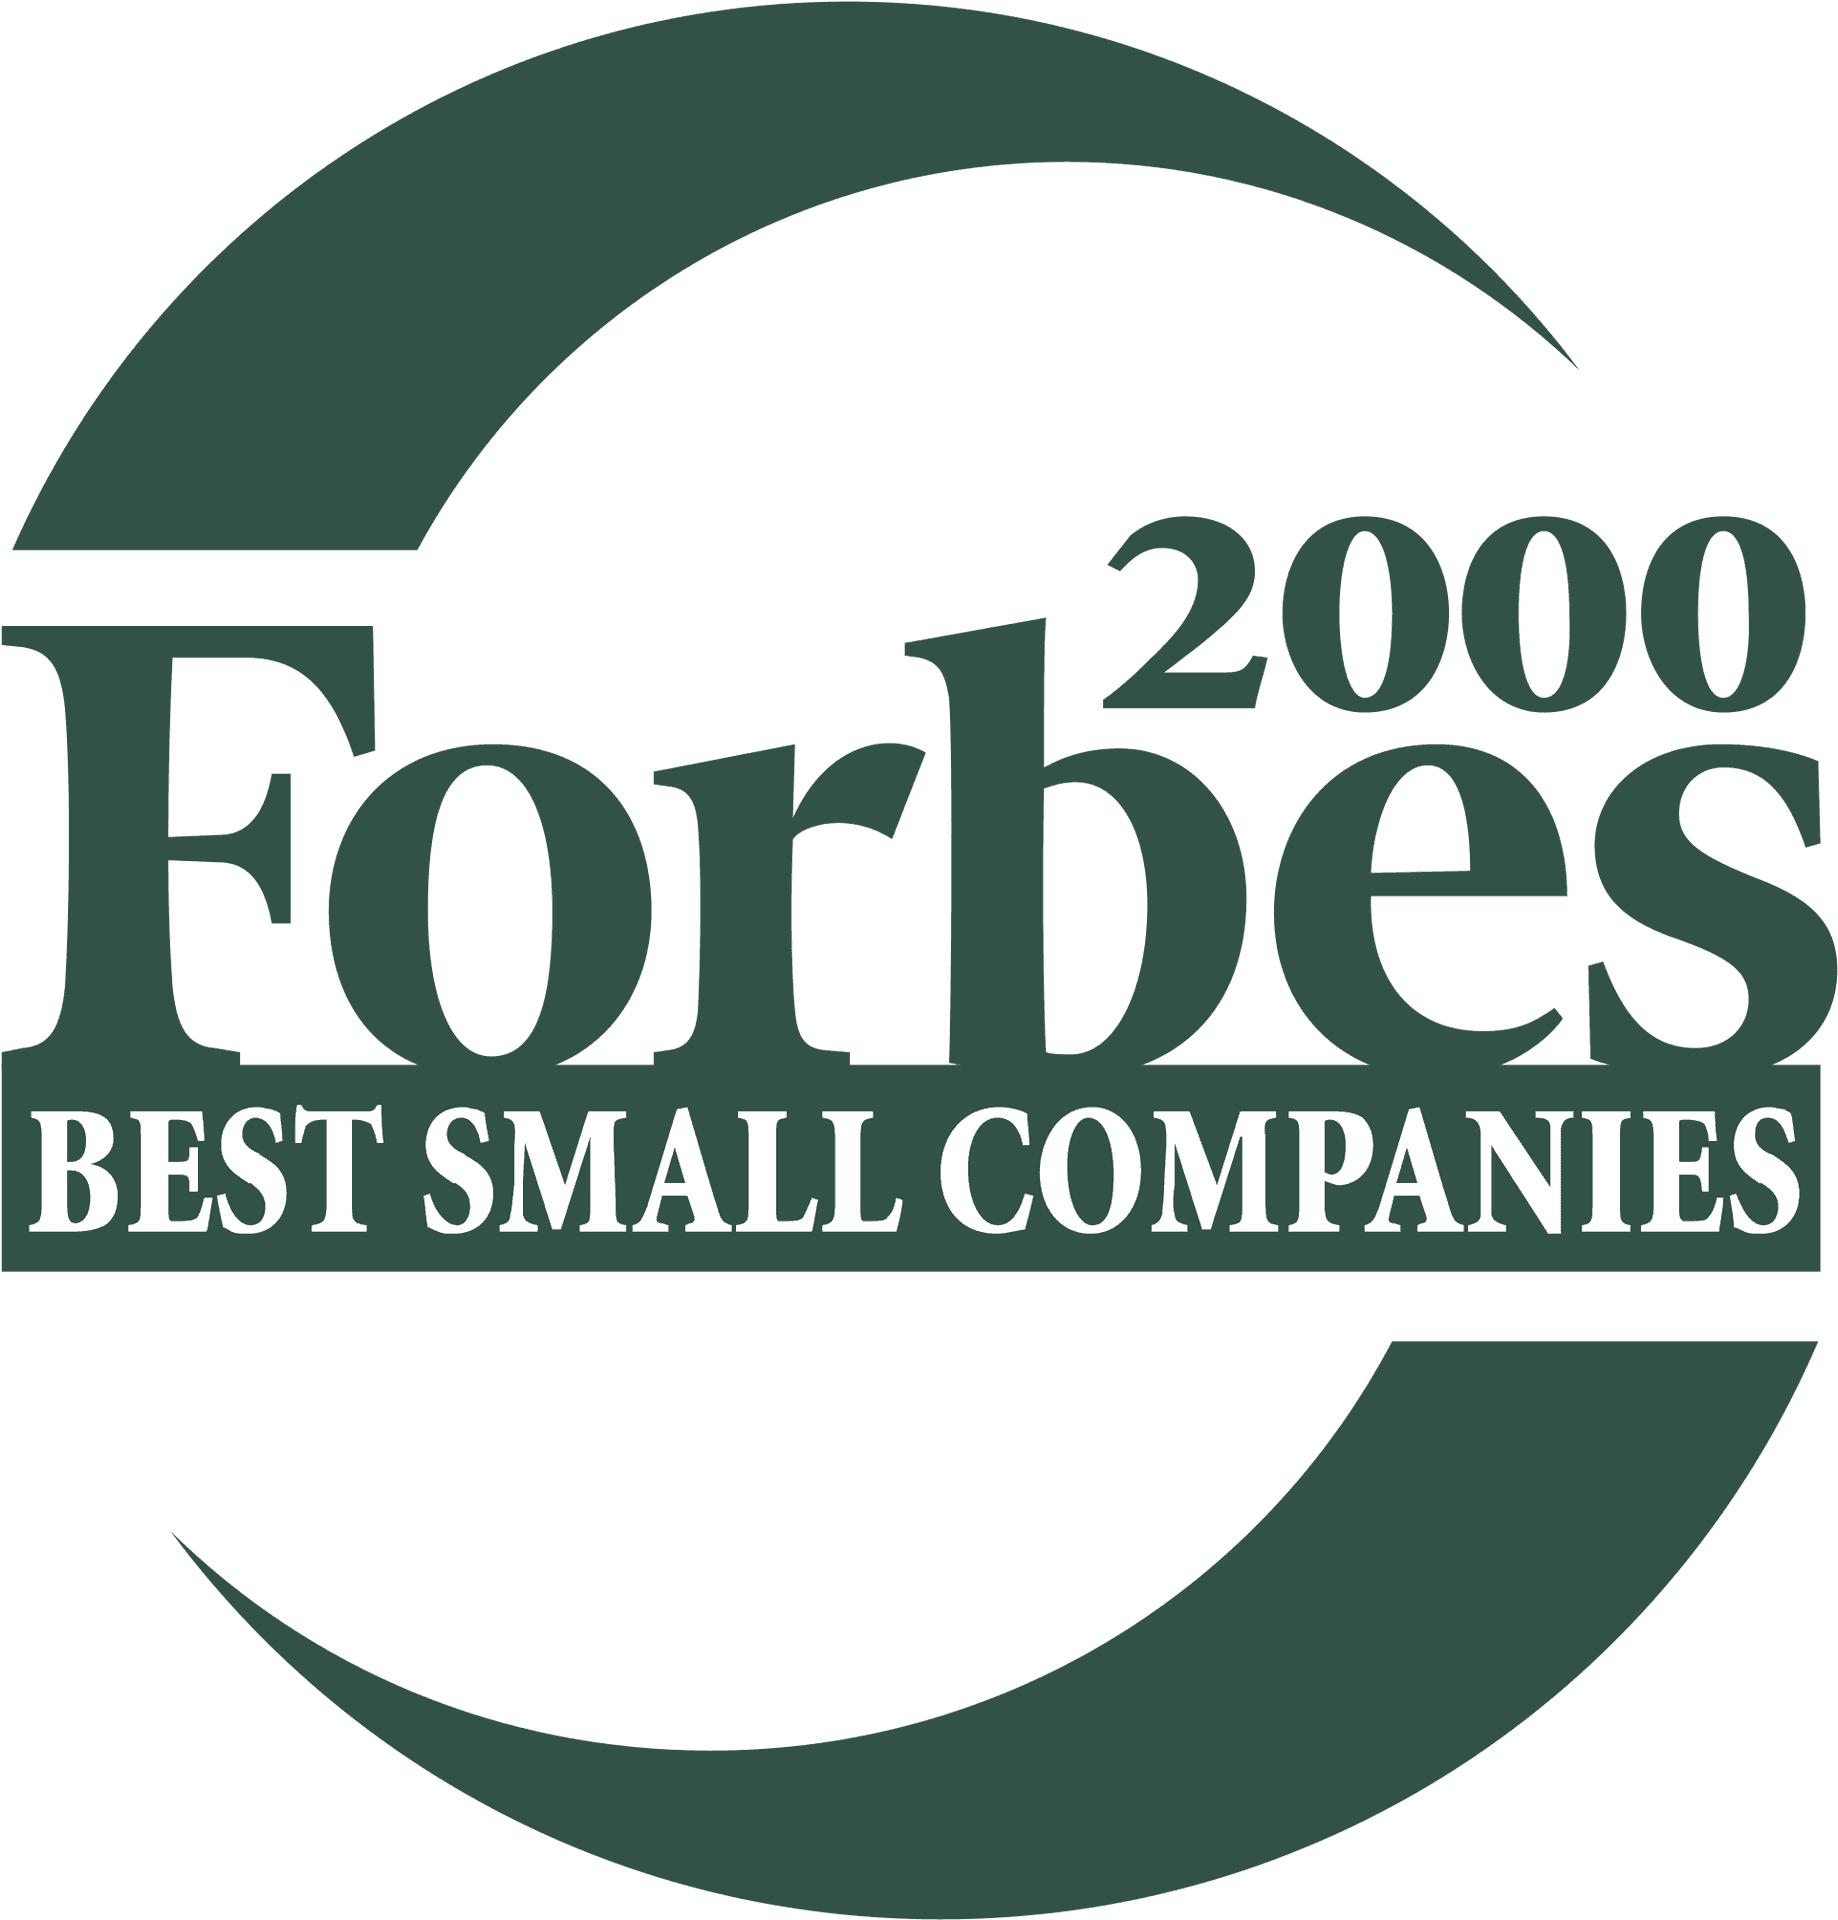 Forbes Best Small Companies2000 Logo PNG